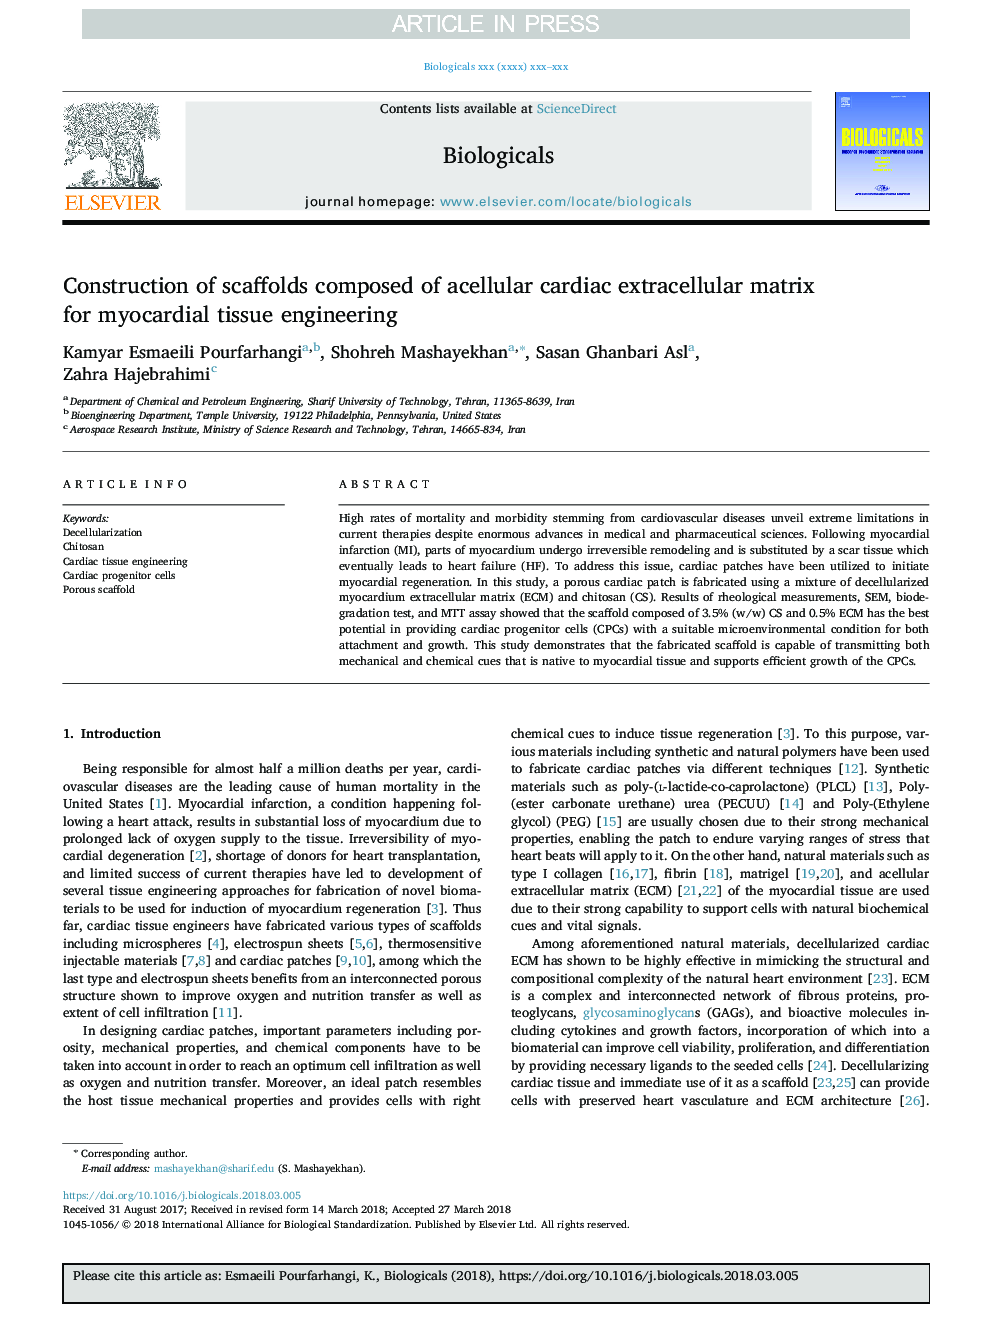 Construction of scaffolds composed of acellular cardiac extracellular matrix for myocardial tissue engineering